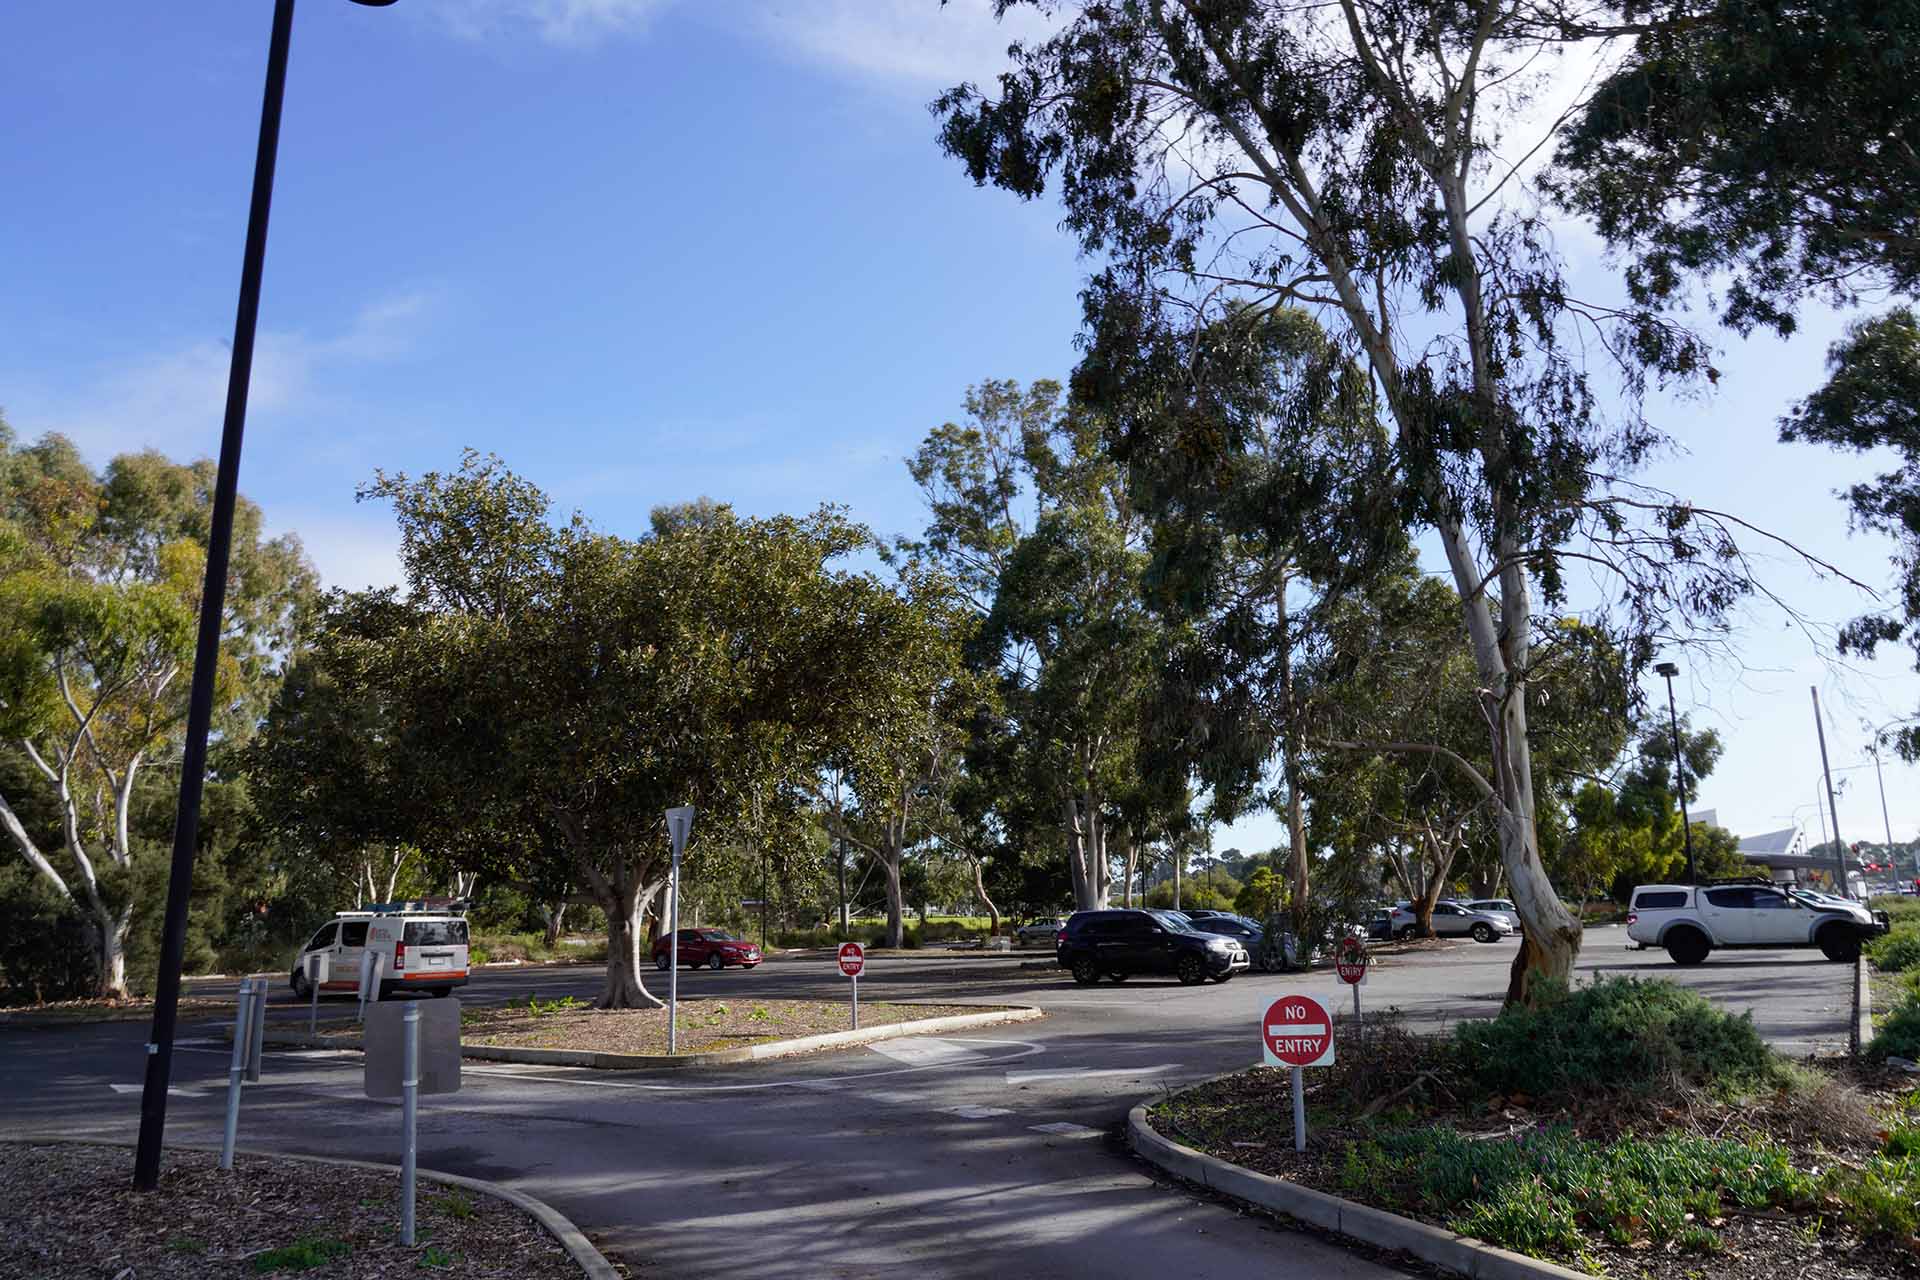 Trees on eastern extent of Kings Reserve, Torrensville. A carpark is visible.